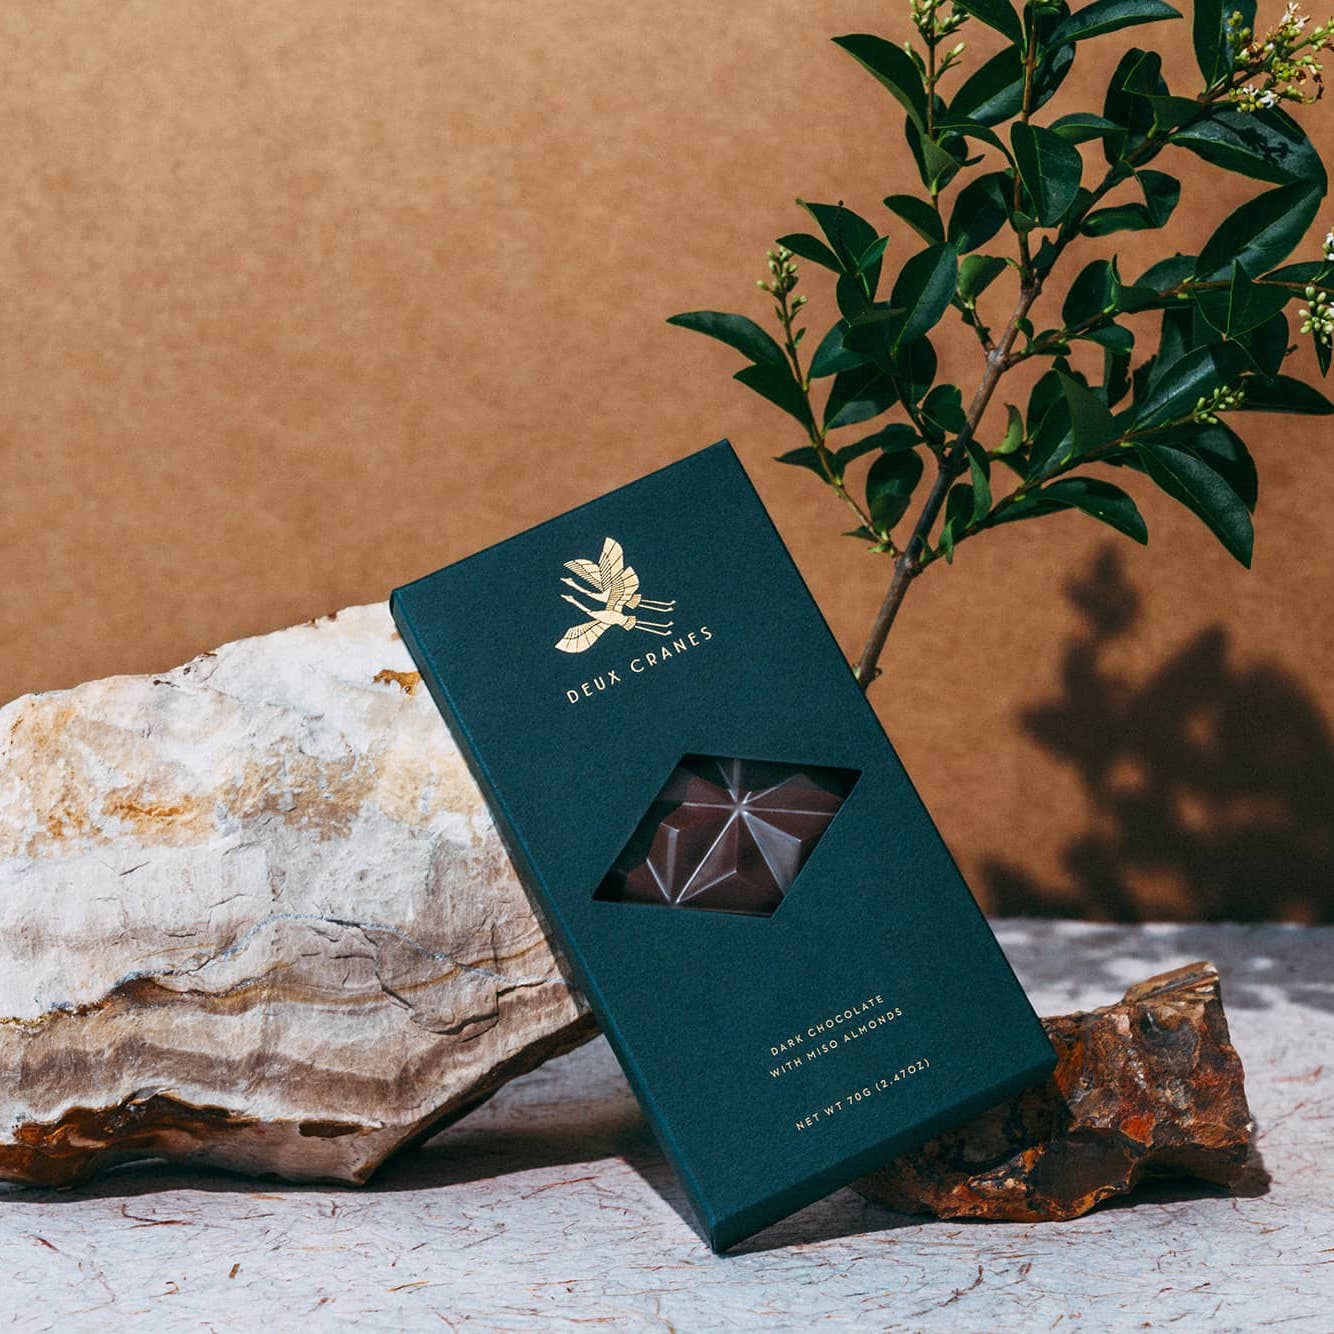 Dark Chocolate with Miso Almonds (Dairy Free) by Deux Cranes